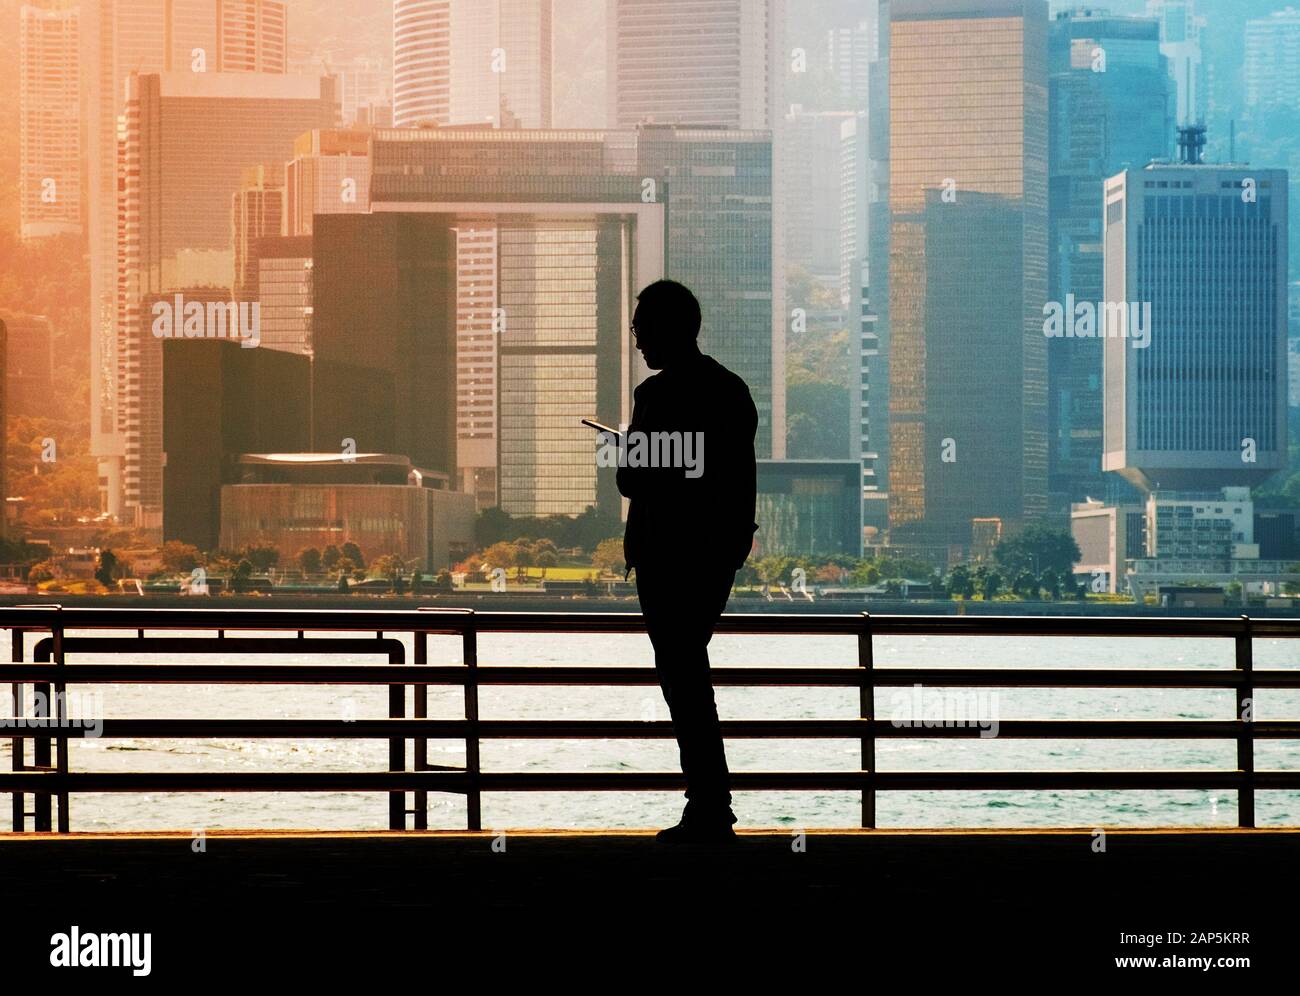 Silhouette of a man looking on mobile phone with Hong Kong Island city skyline background Stock Photo